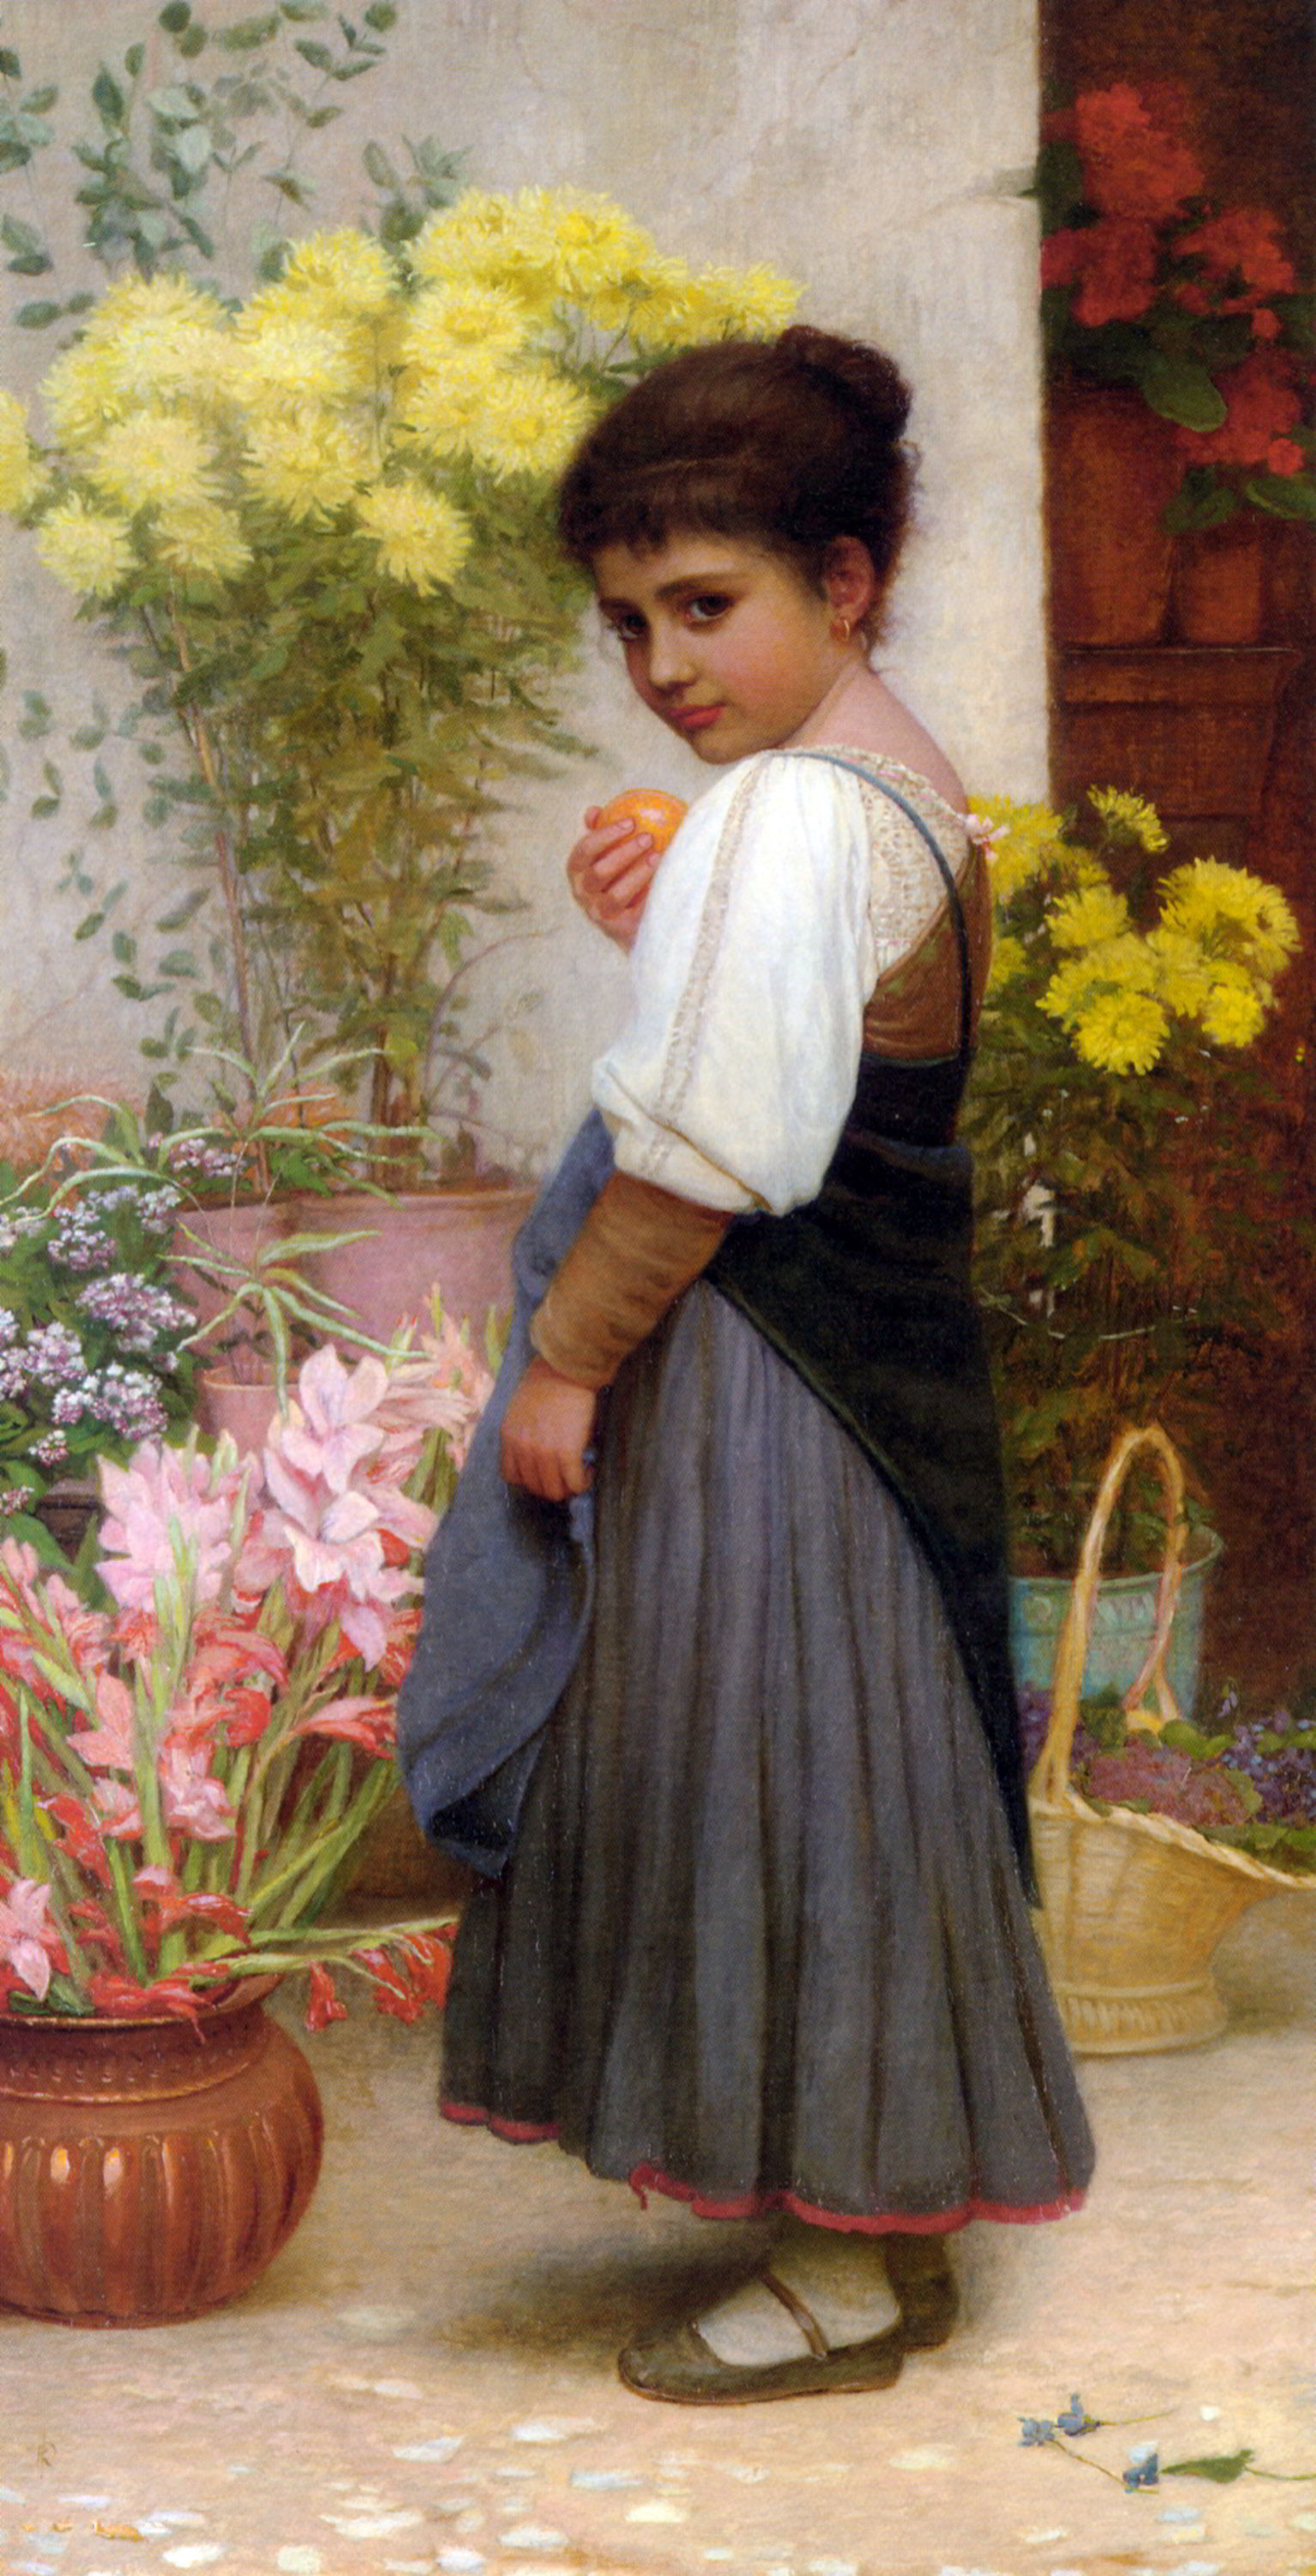 The Flower Merchant by Kate Perugini